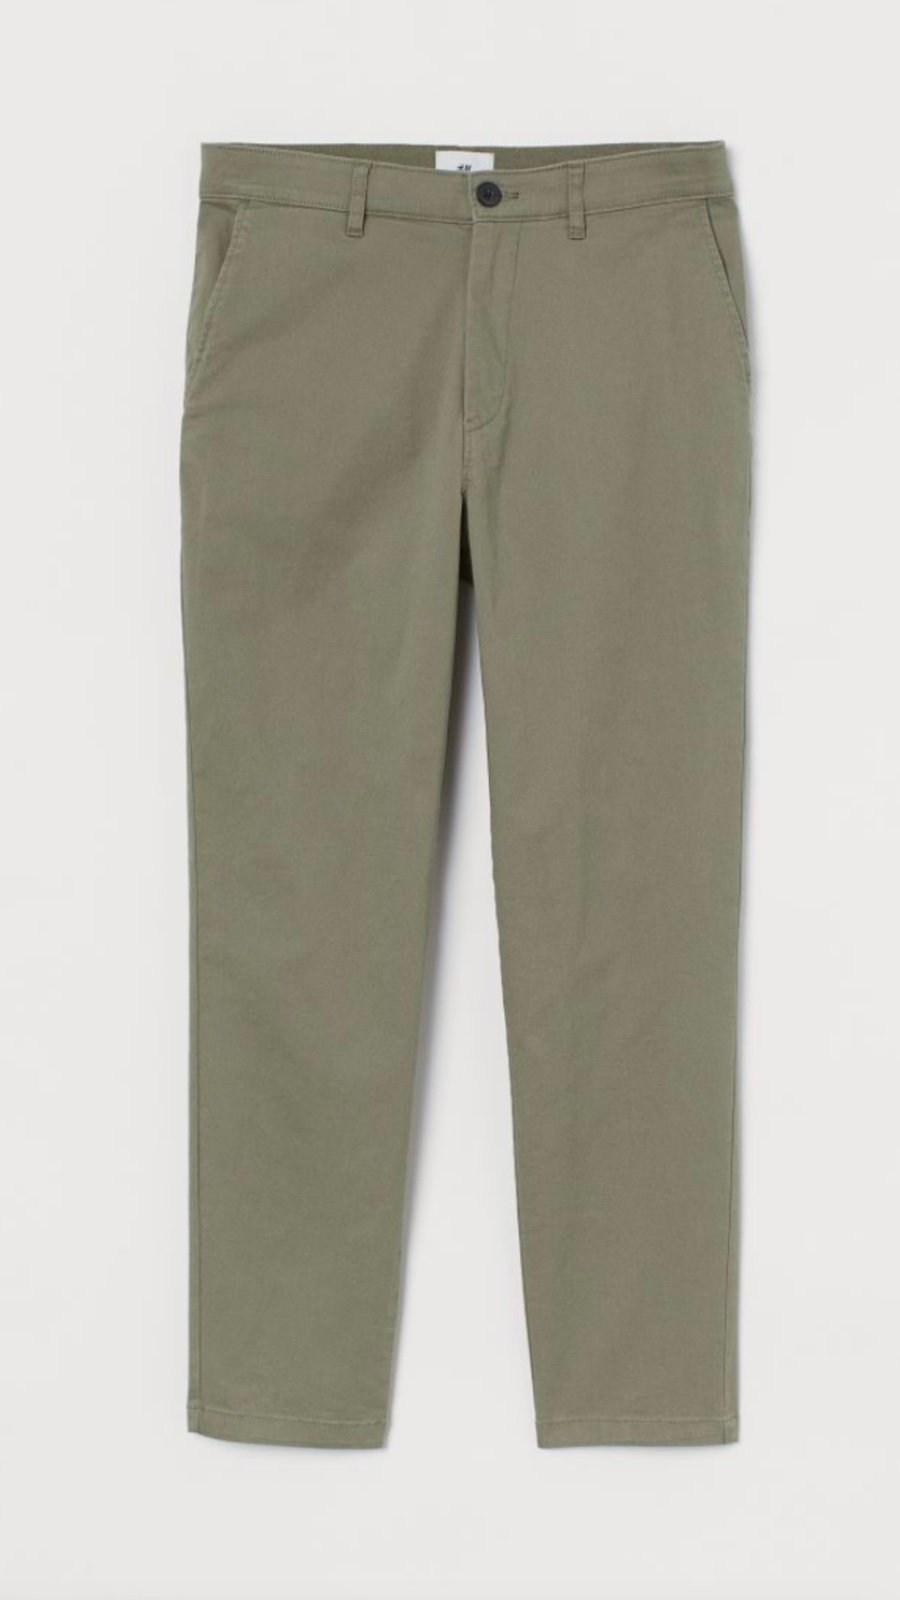 Perfect Women’s H&M size 12 olive green cropped chinos.